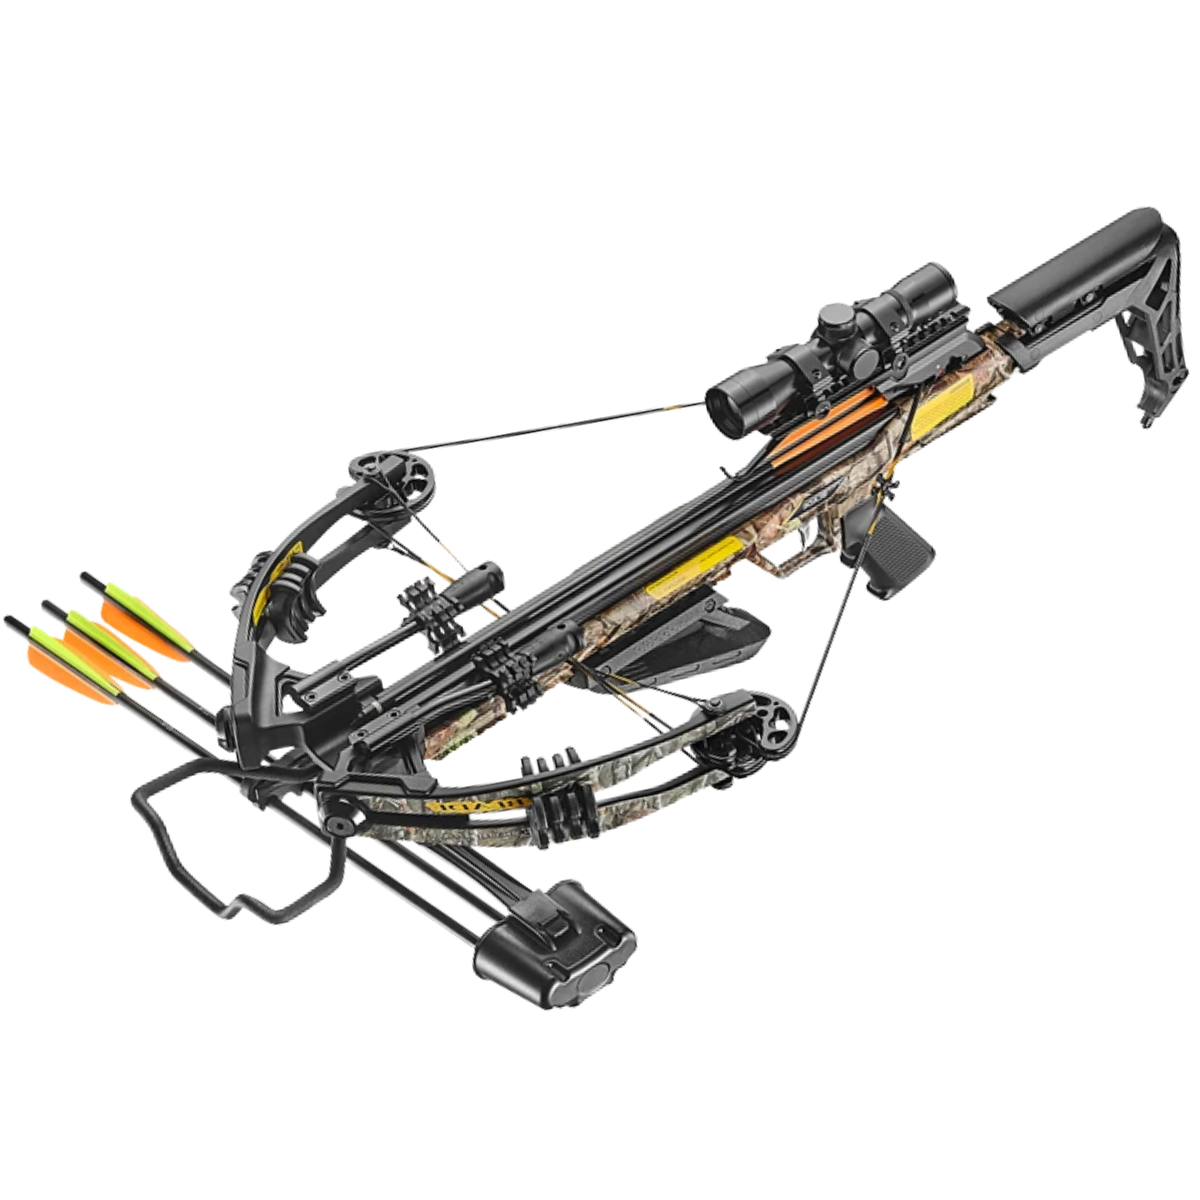 EK Archery Blade+ Compound Crossbow Package 340fps - Fast UK Shipping | Tactical Archery UK